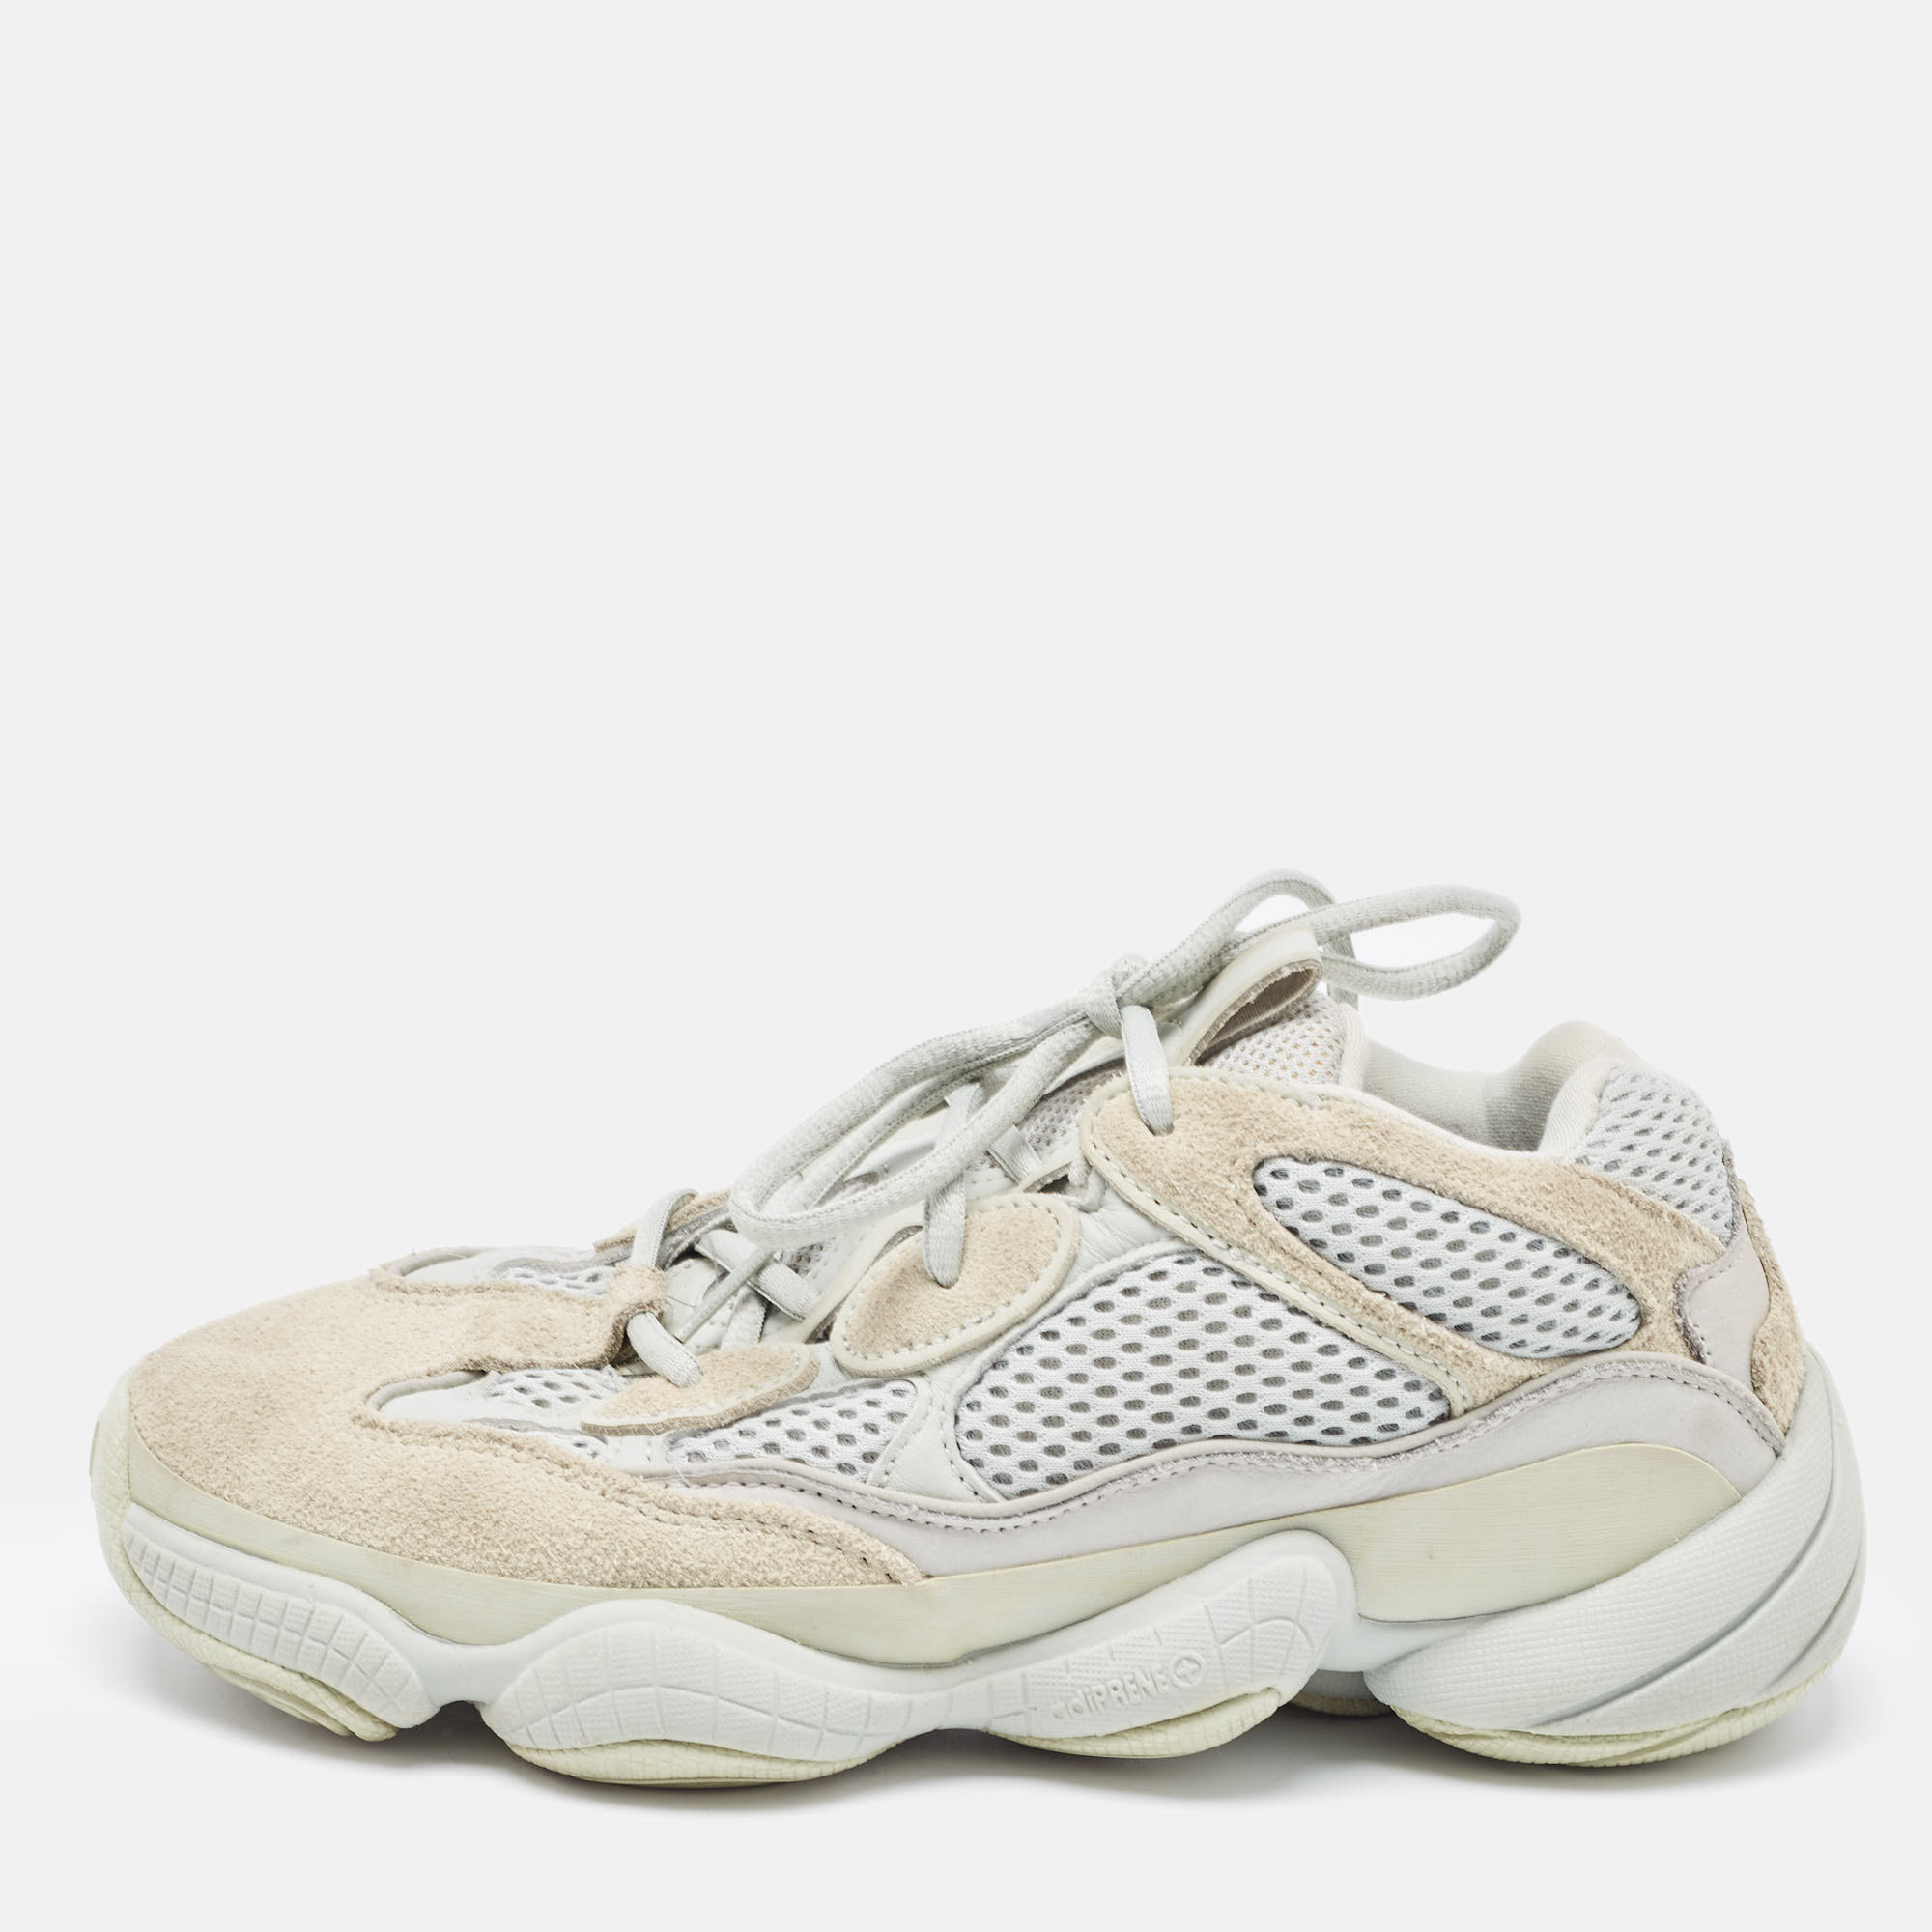 Yeezy X Adidas Two Tone Suede And Mesh Yeezy 500 Salt Sneakers Size 38